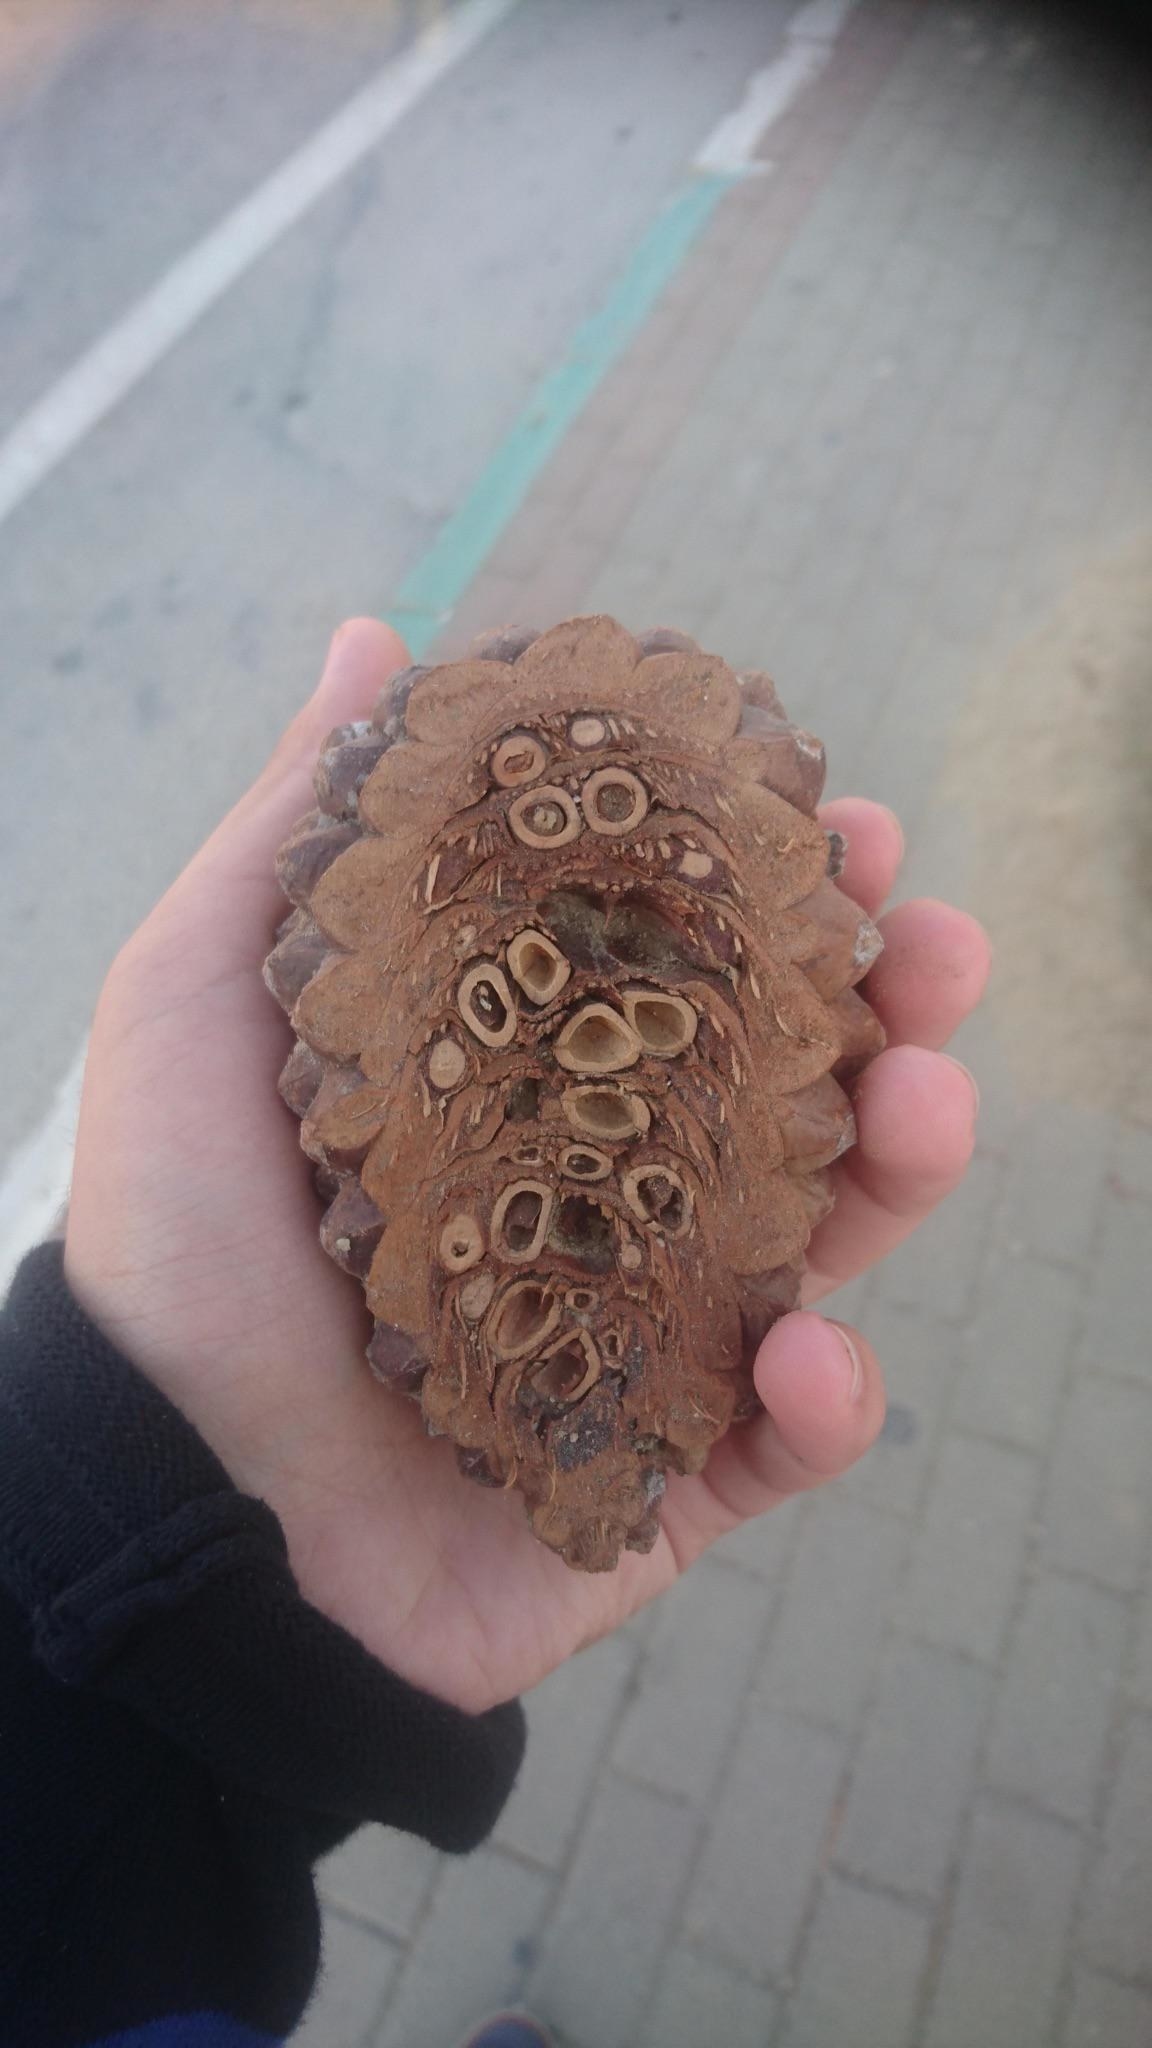 What look like hollow bones or even eyes inside the pine cone